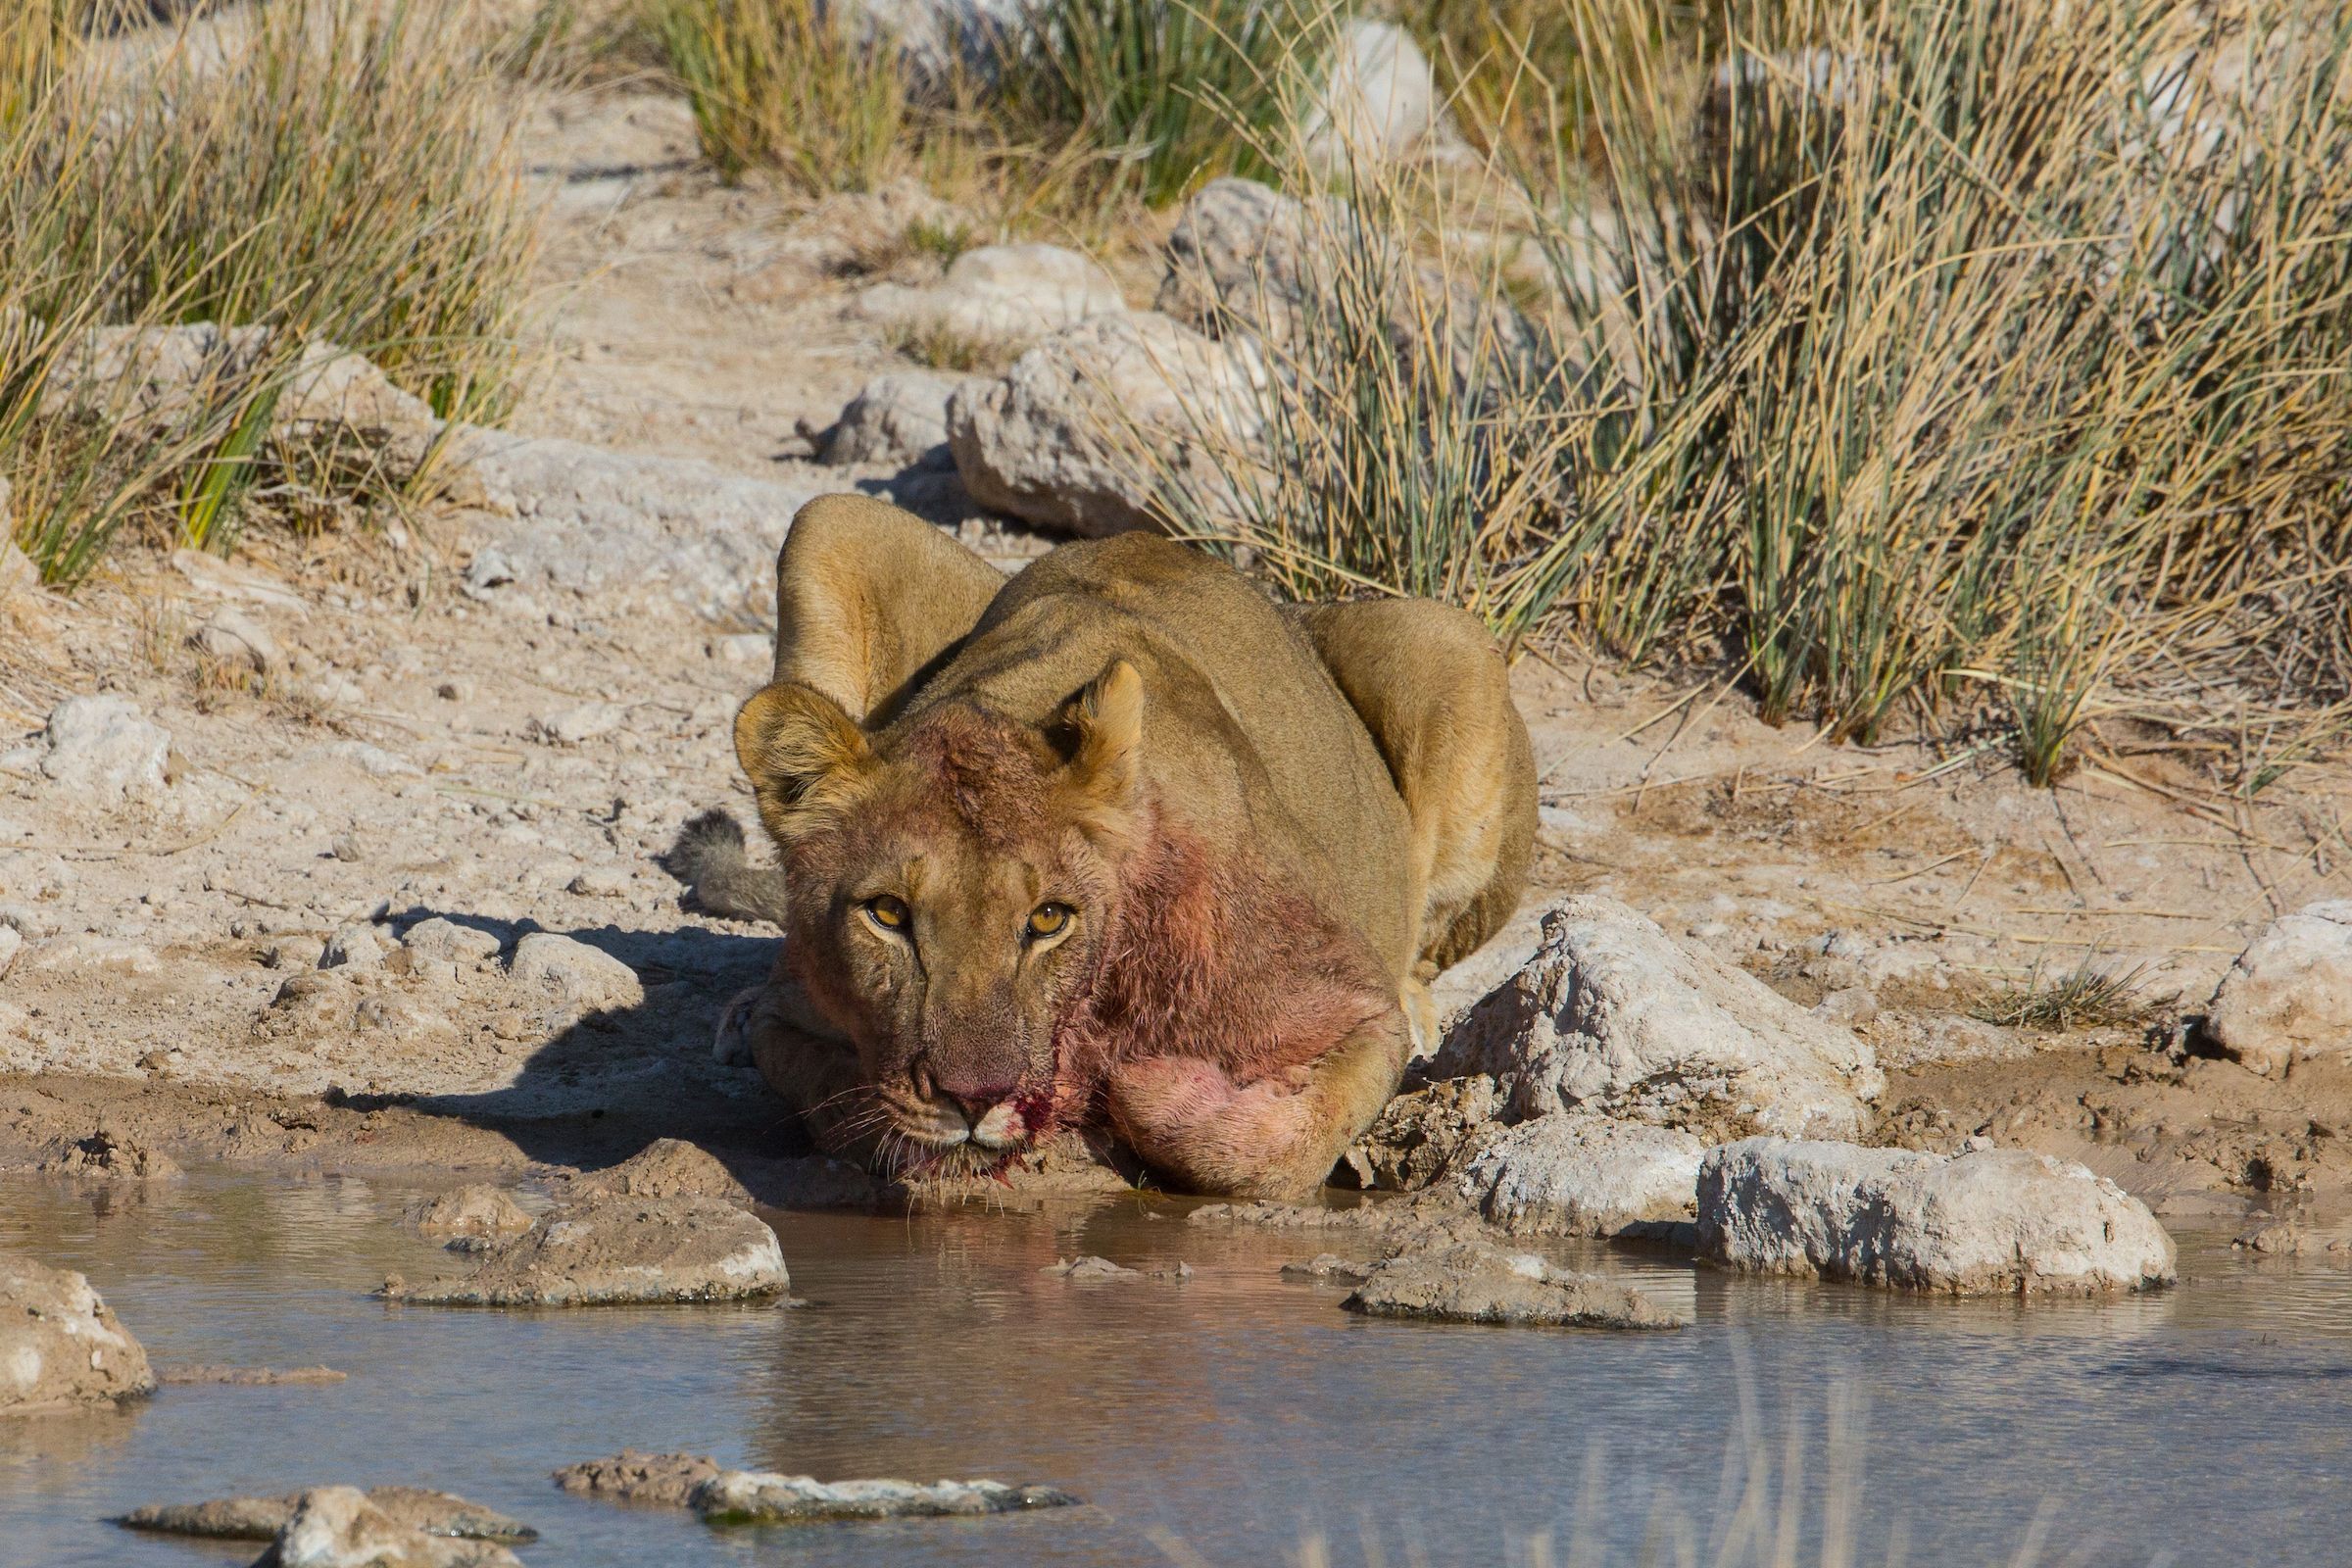 A Lioness drinking at a waterhole in Etosha, Namibia's premier safari location